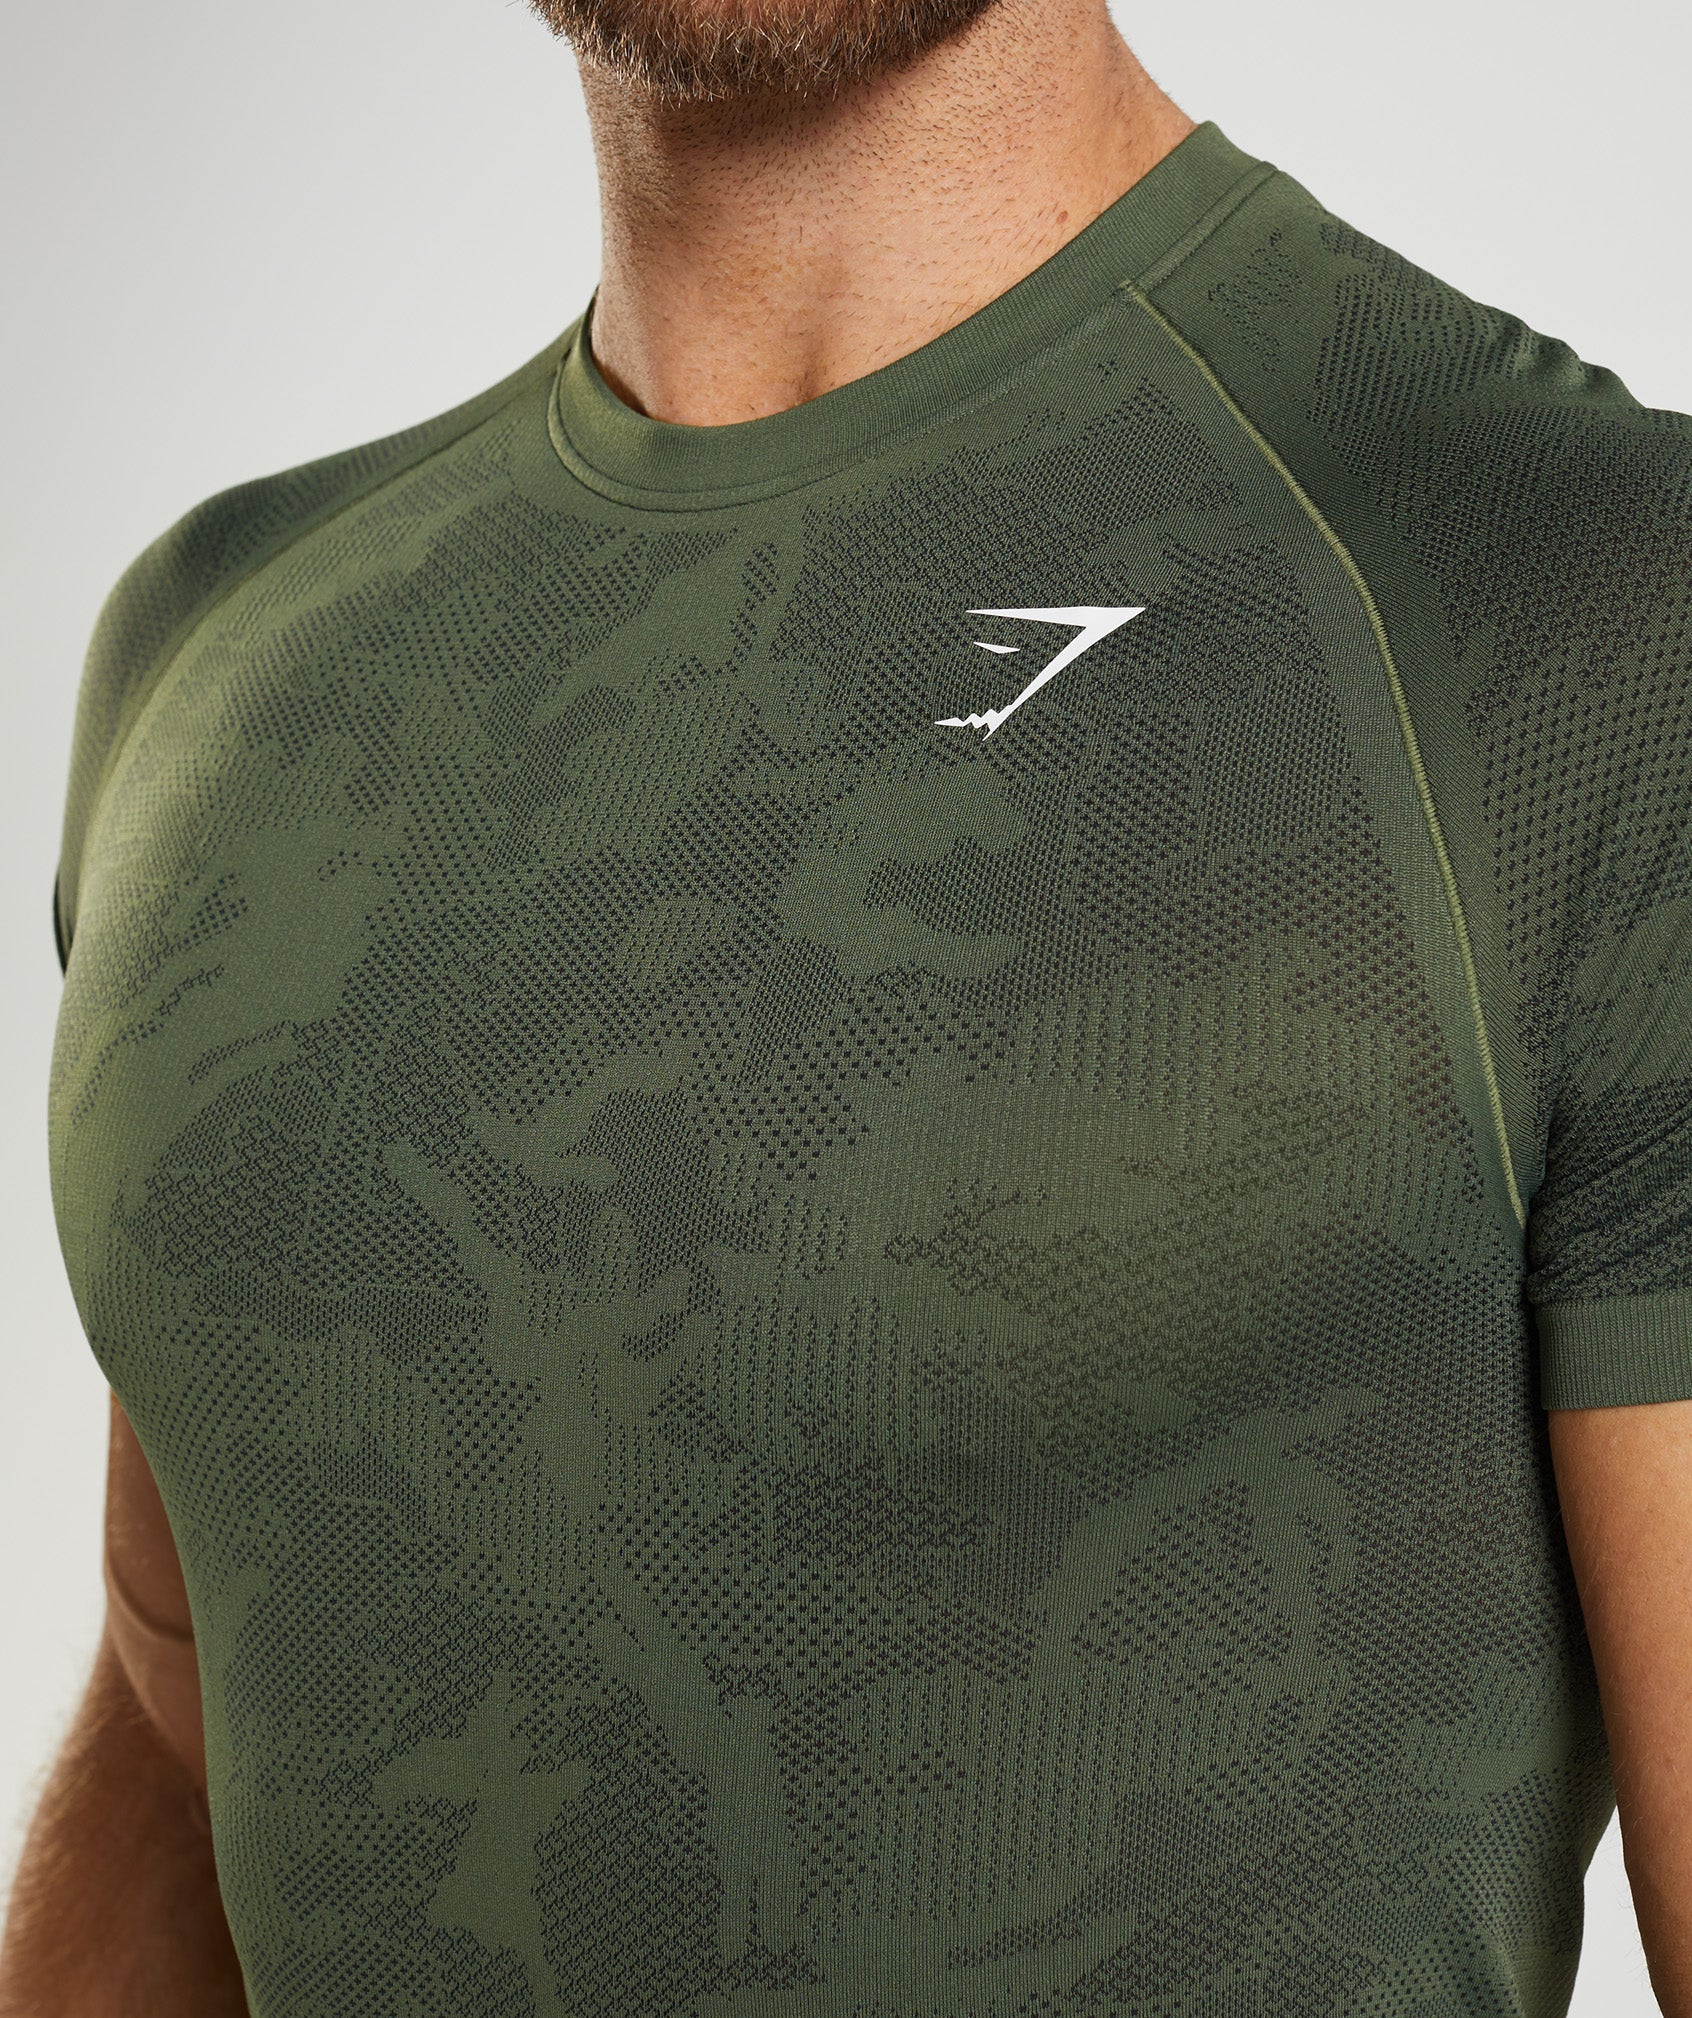 Geo Seamless T-Shirt in Core Olive/Black